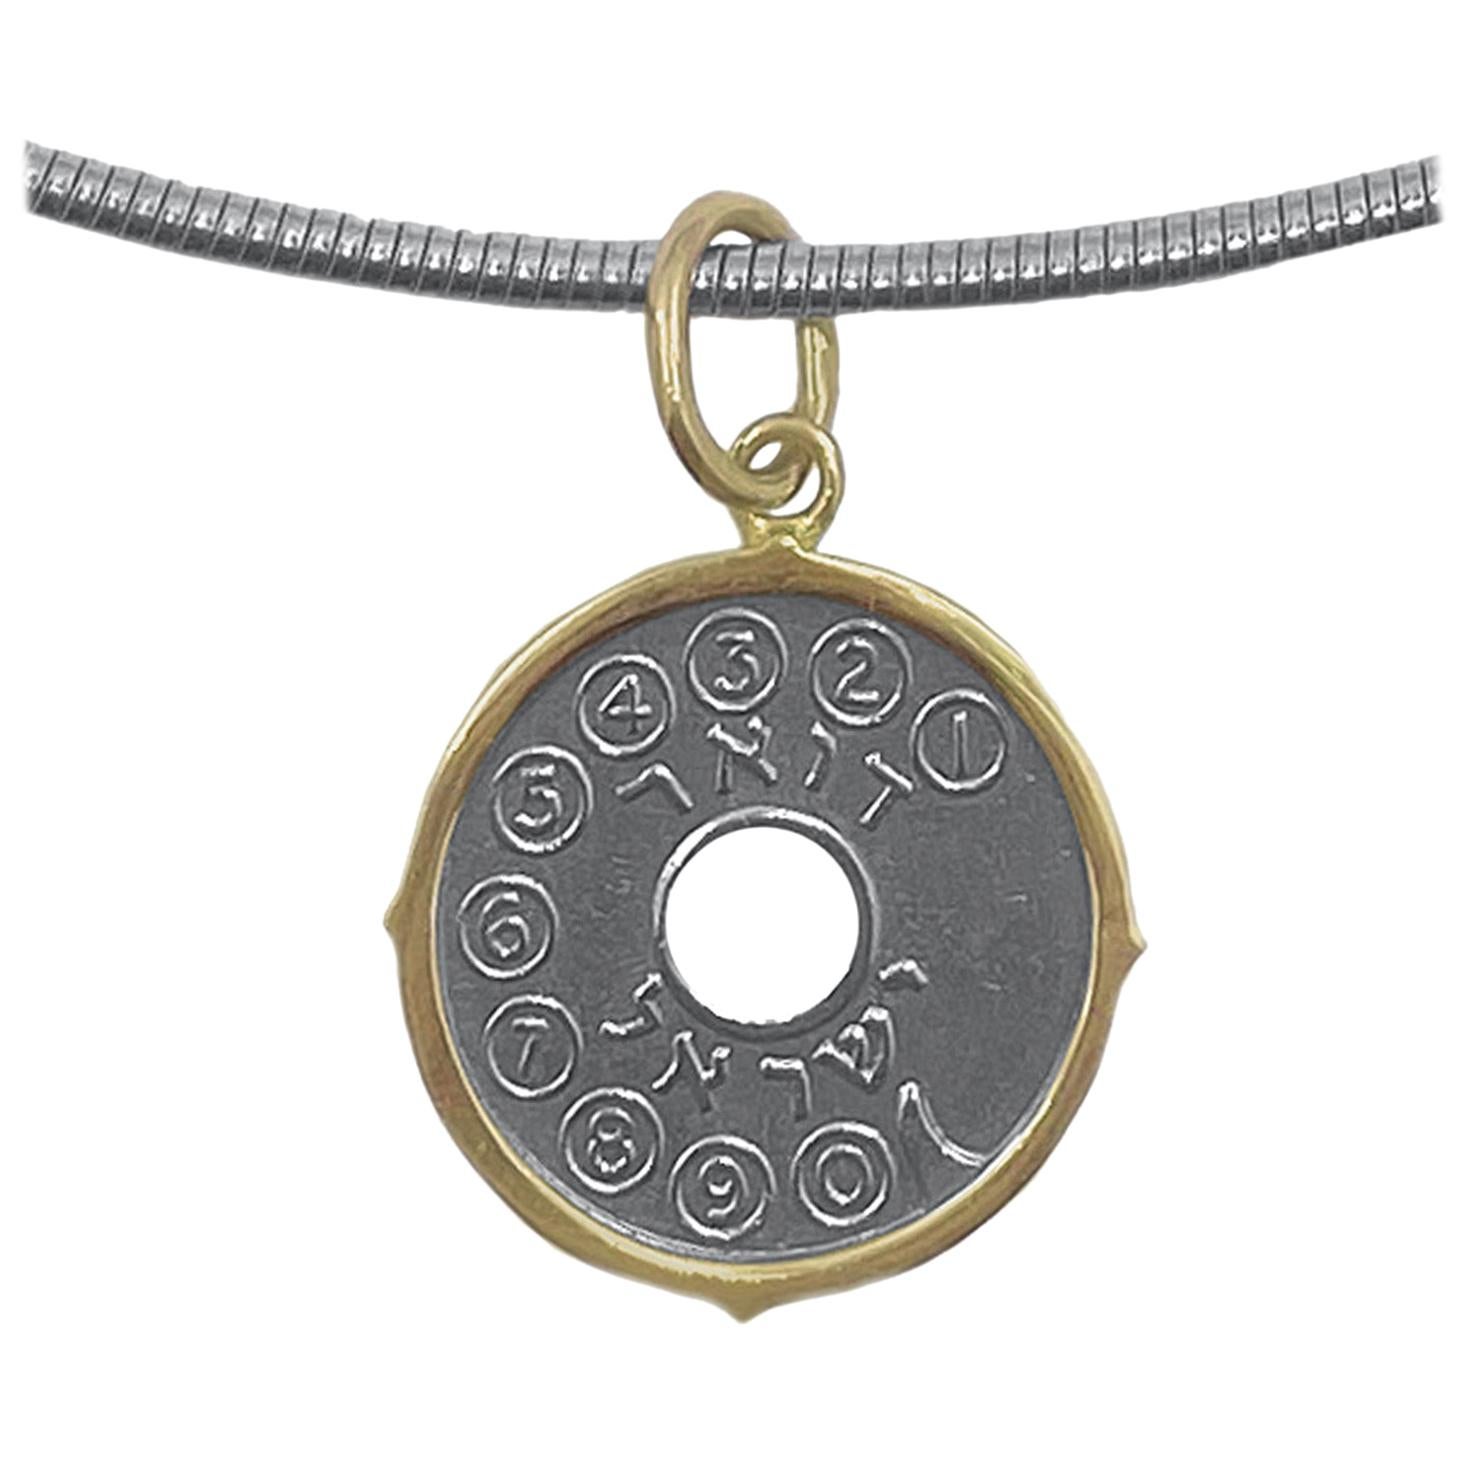 Asimon Phone Token Pendant Set in Gold on Steel Chain with Gold Hardware